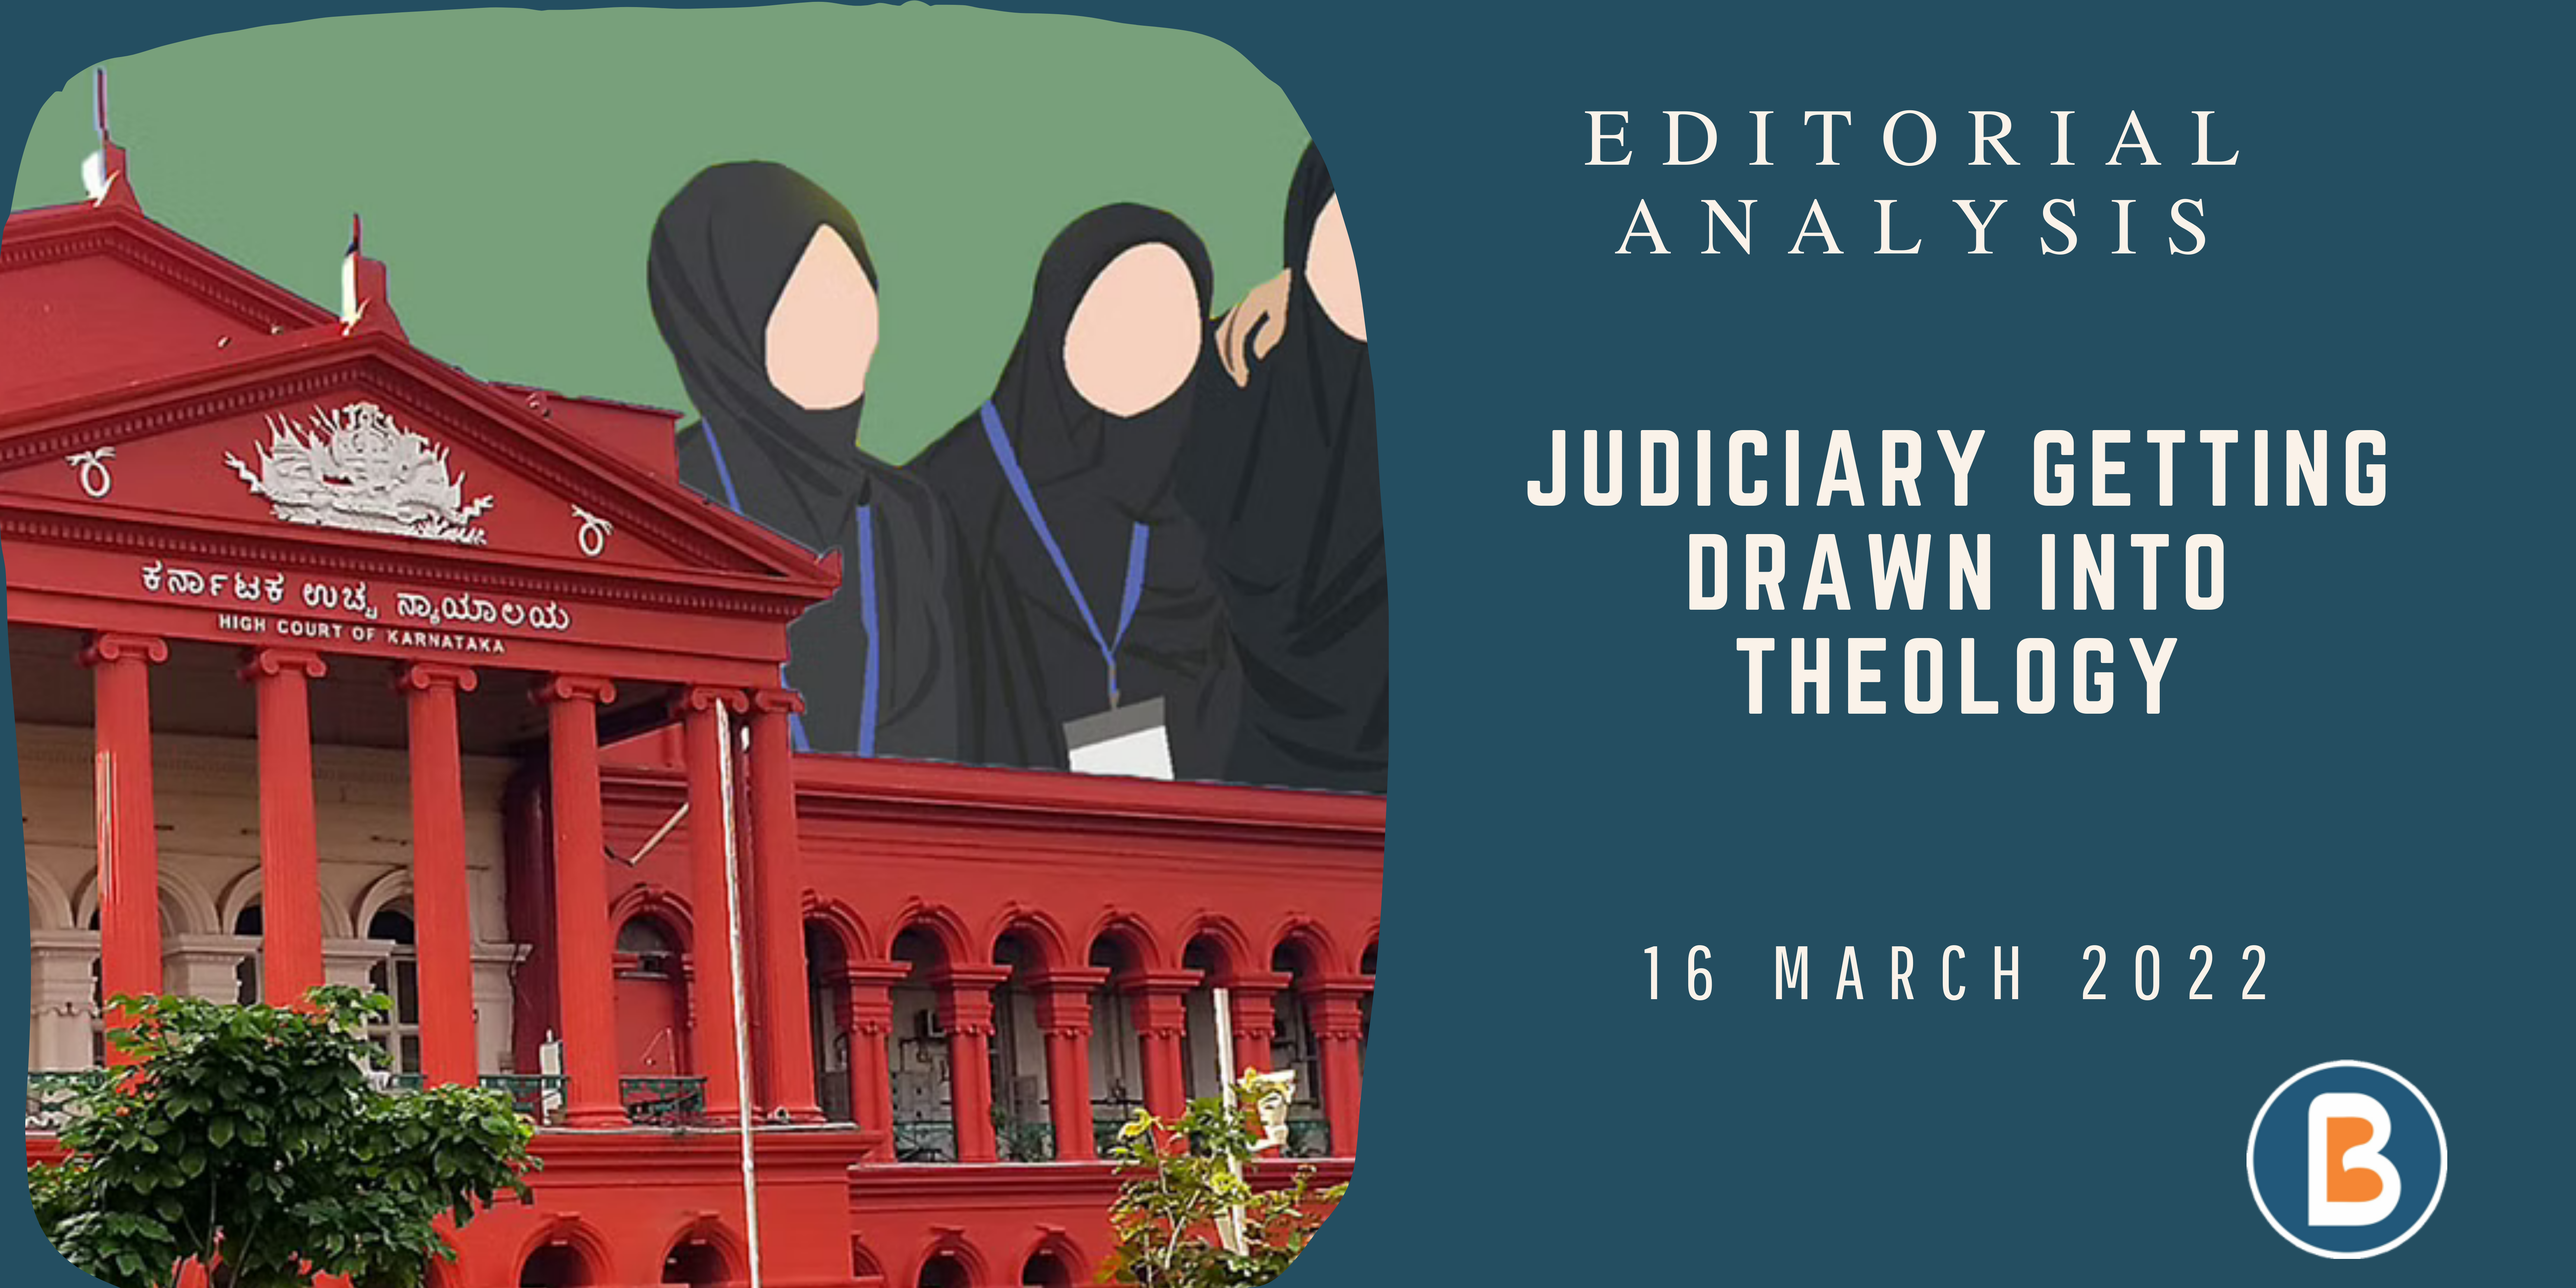 Editorial Analysis for Civil Services - Judiciary Getting Drawn into Theology